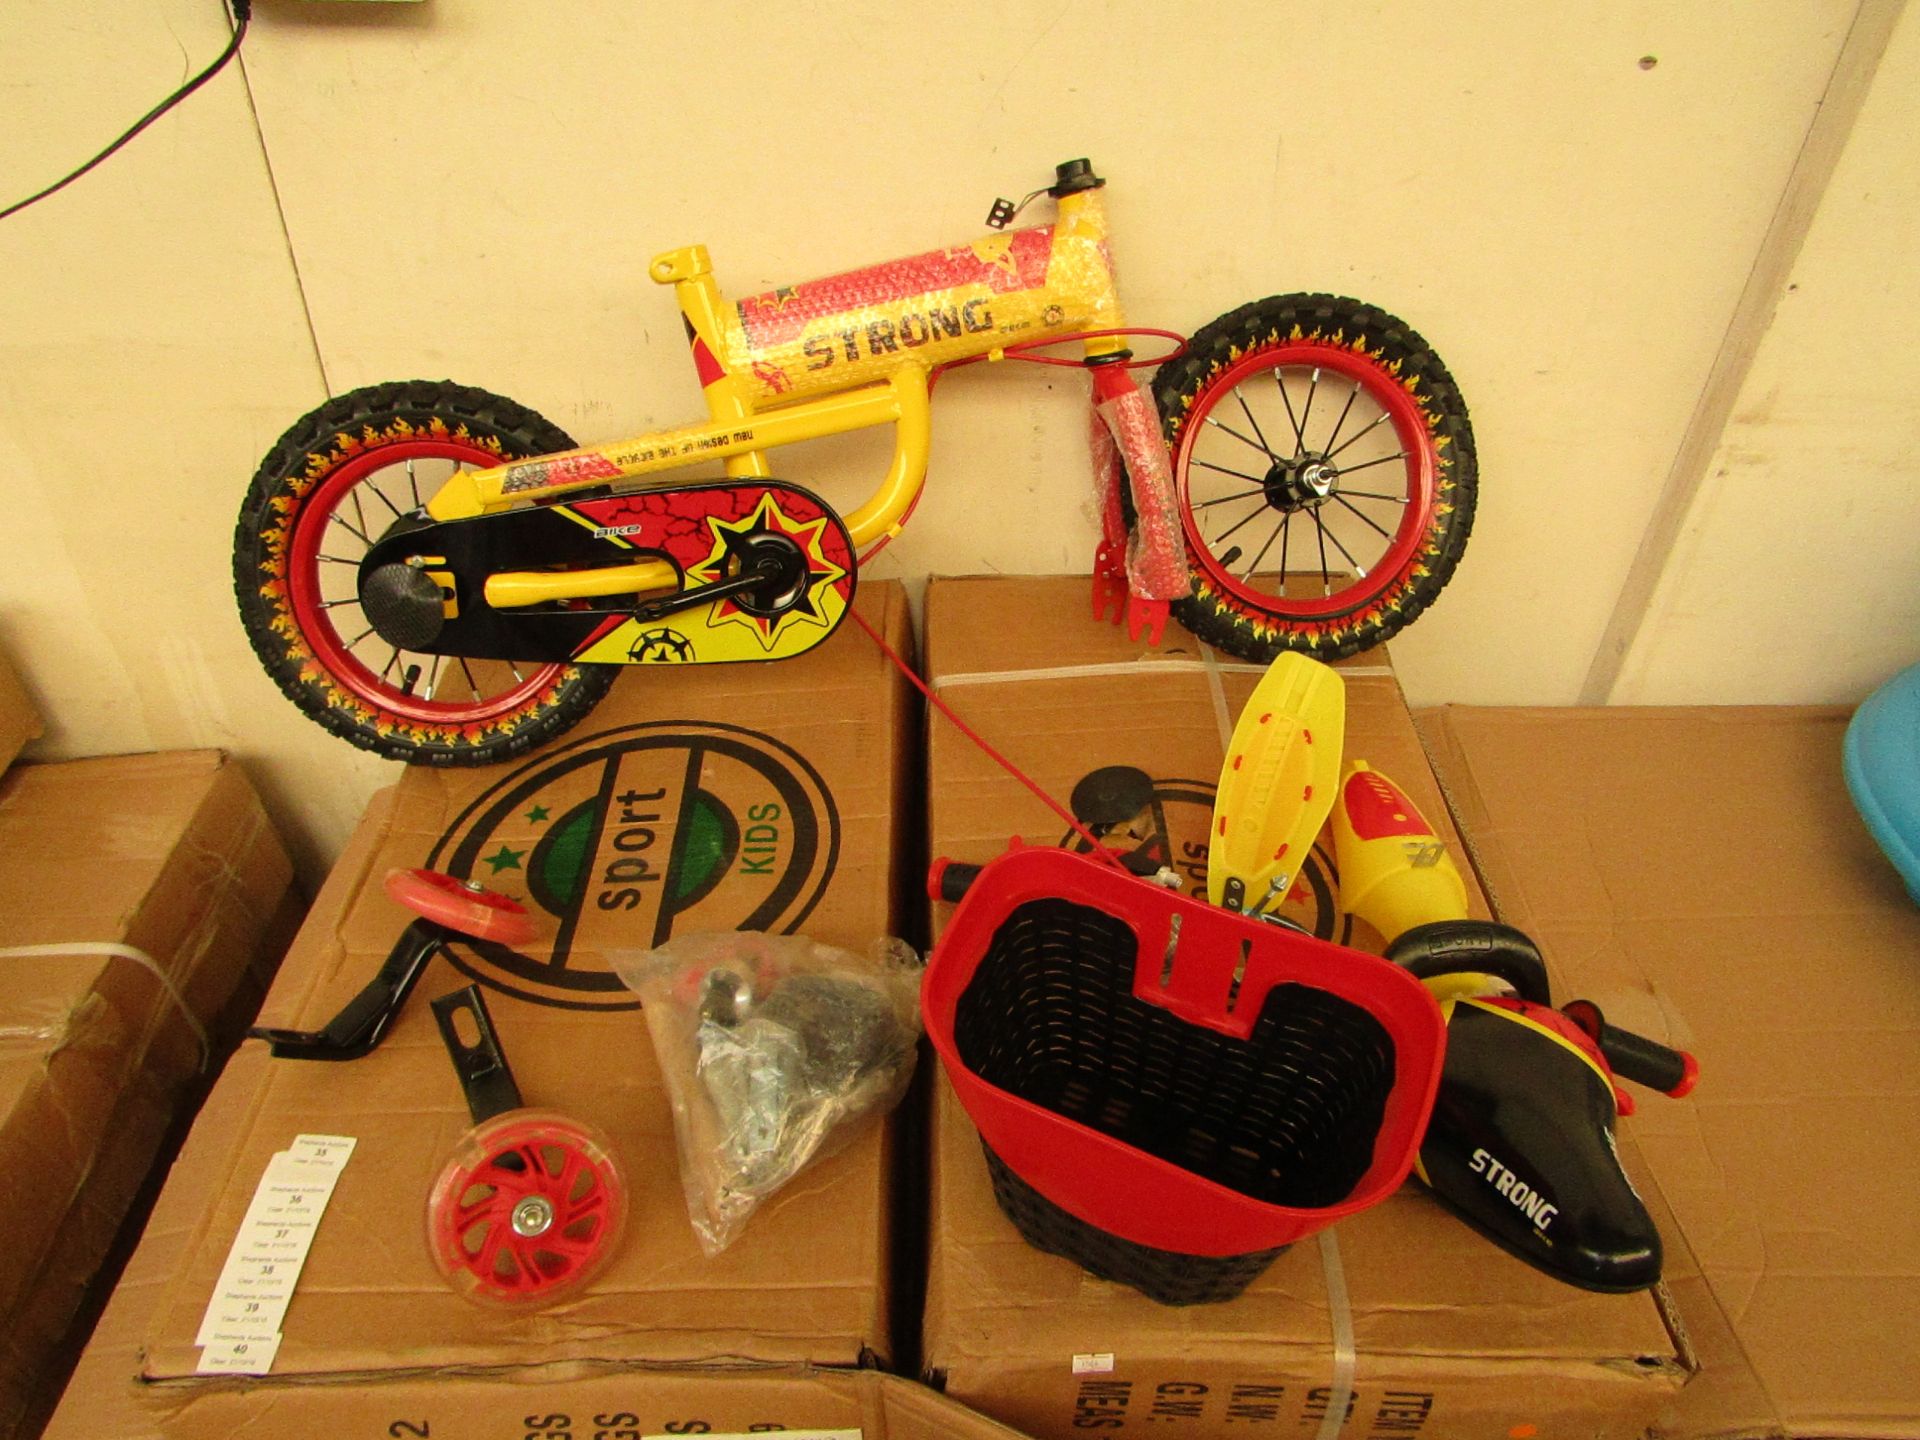 Sport kids Yellow colour bicycle with stabilisers, new and boxed.